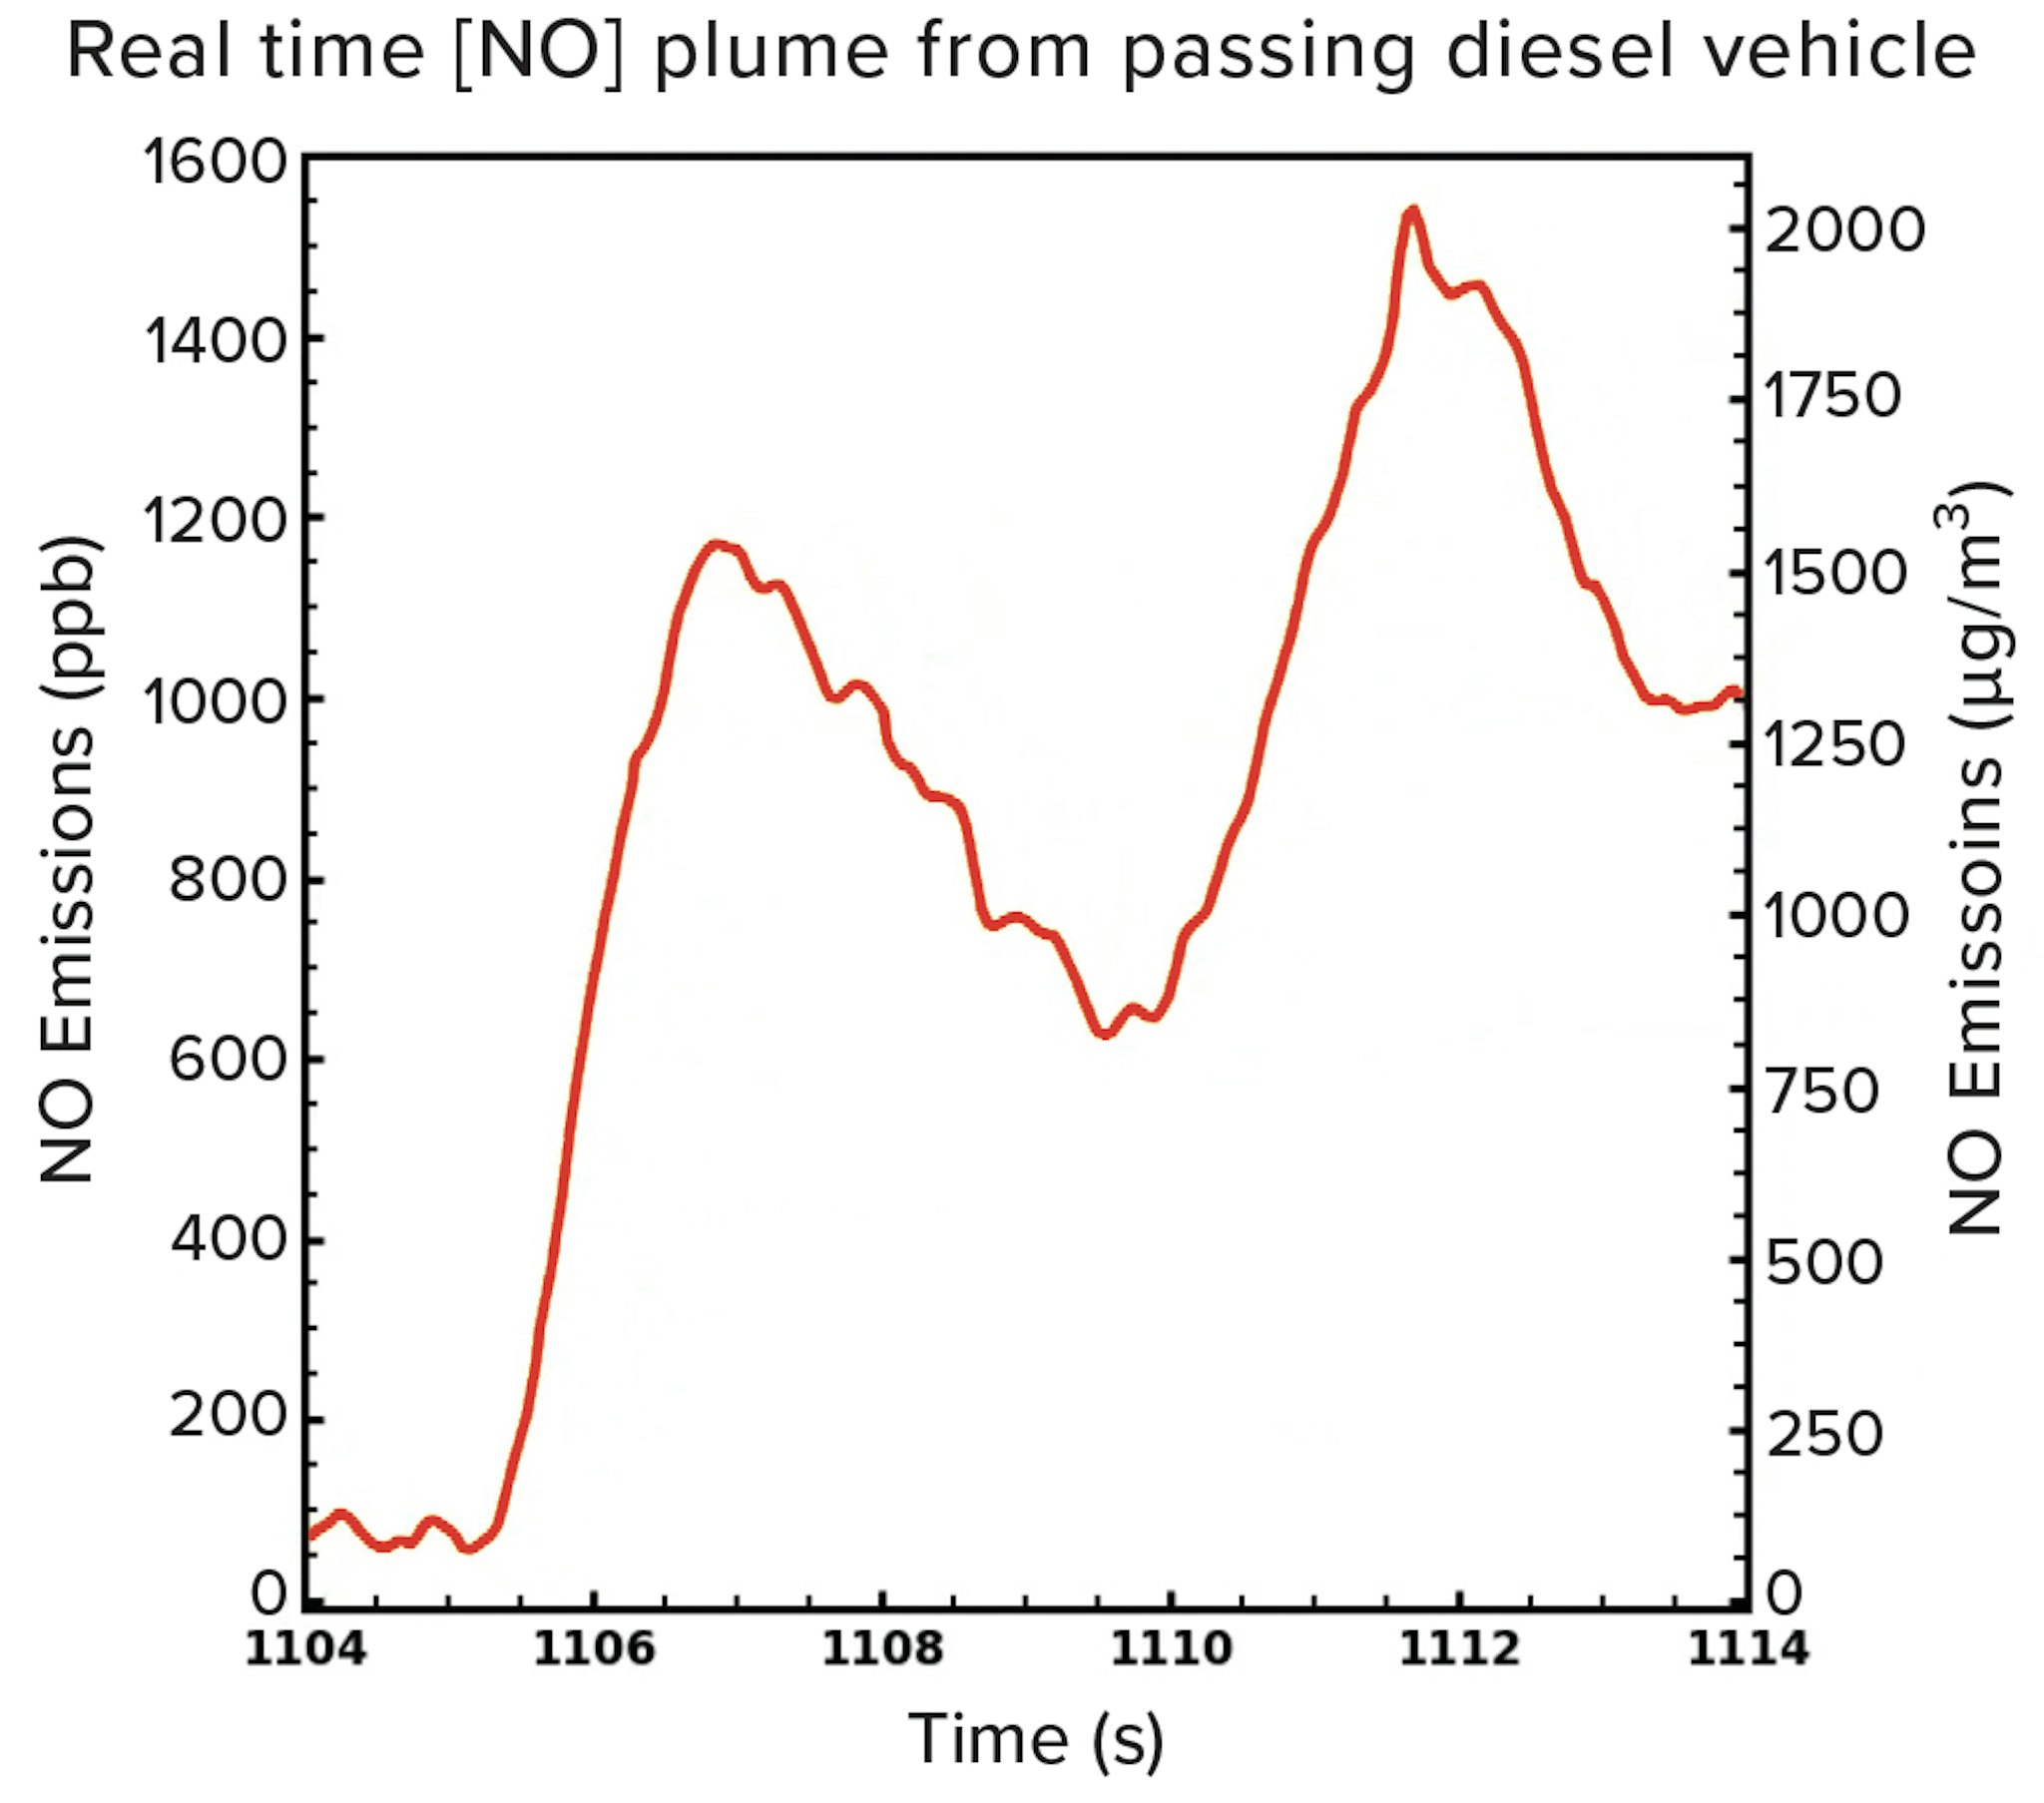 Realtime roadside NO plume from a passing diesel vehicle